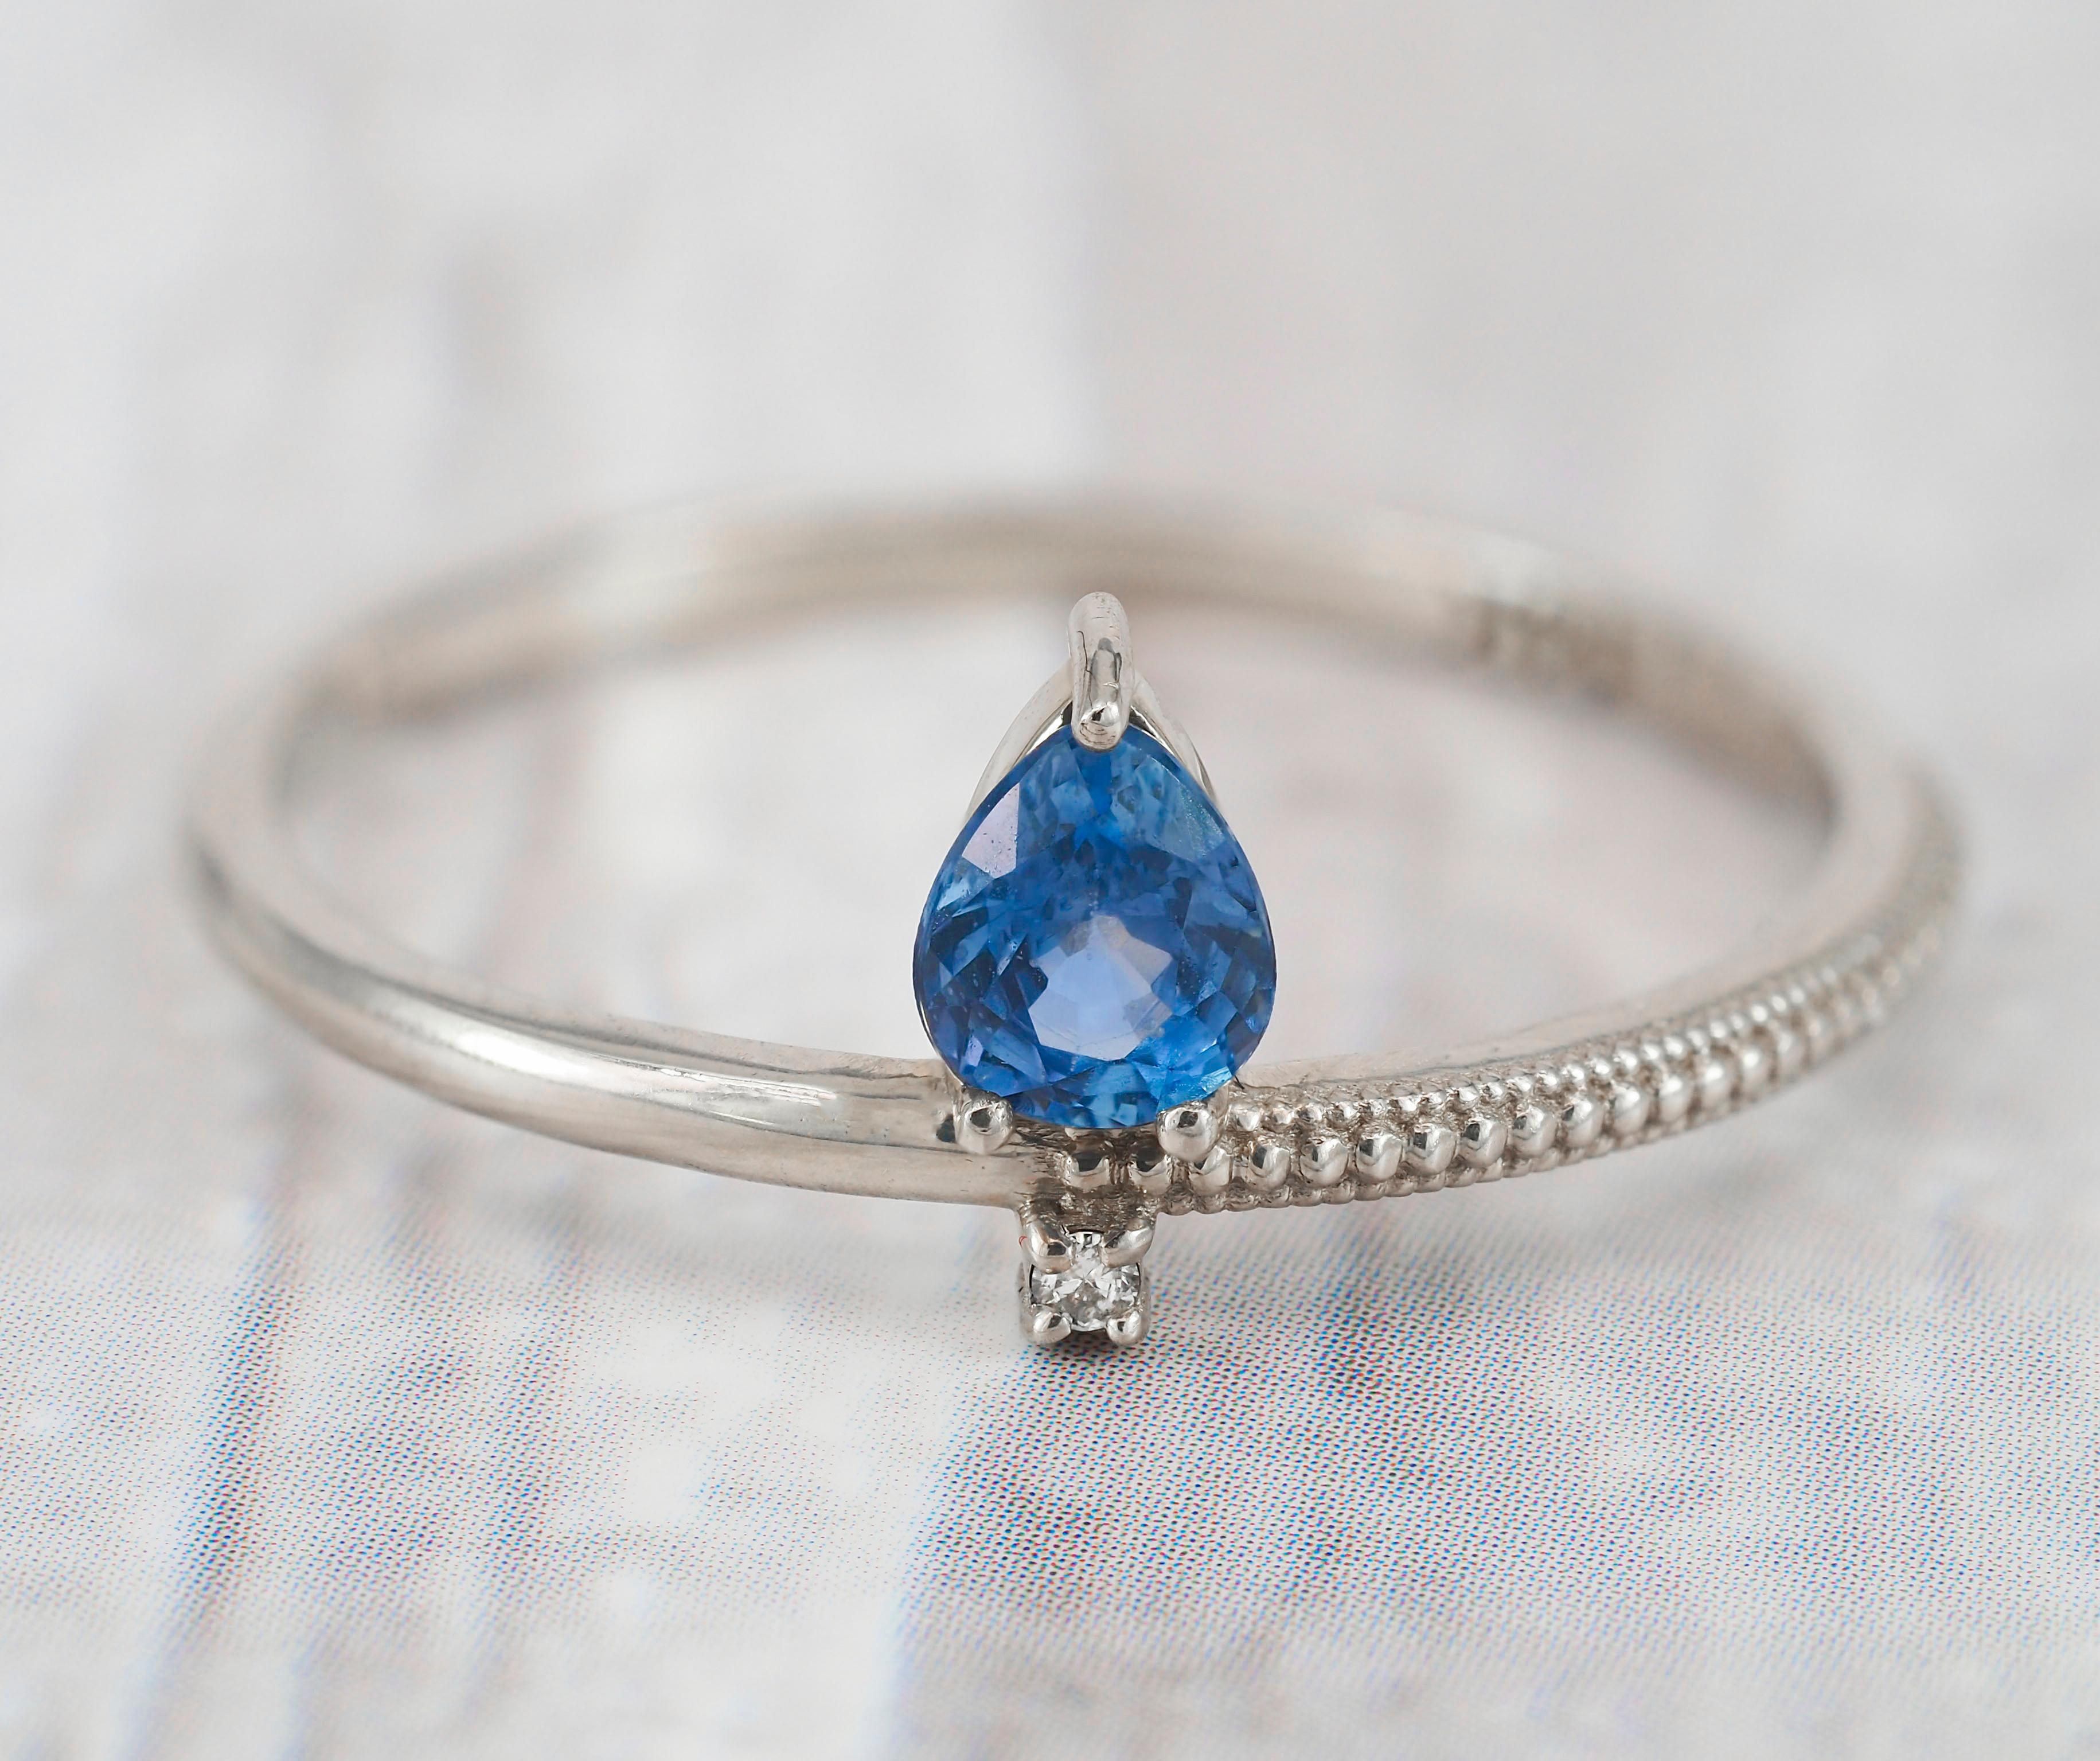 14k solid gold ring with pear 0.5 ct sapphire. 
Blue gemstone ring. September birthstone ring. Genuine sapphire ring. Vintage engagement ring.

Metal: 14k gold
Weight: 1.5 g. depends from size.

Set with sapphire, color -  blue
Pear cut, 0.50 ct. in